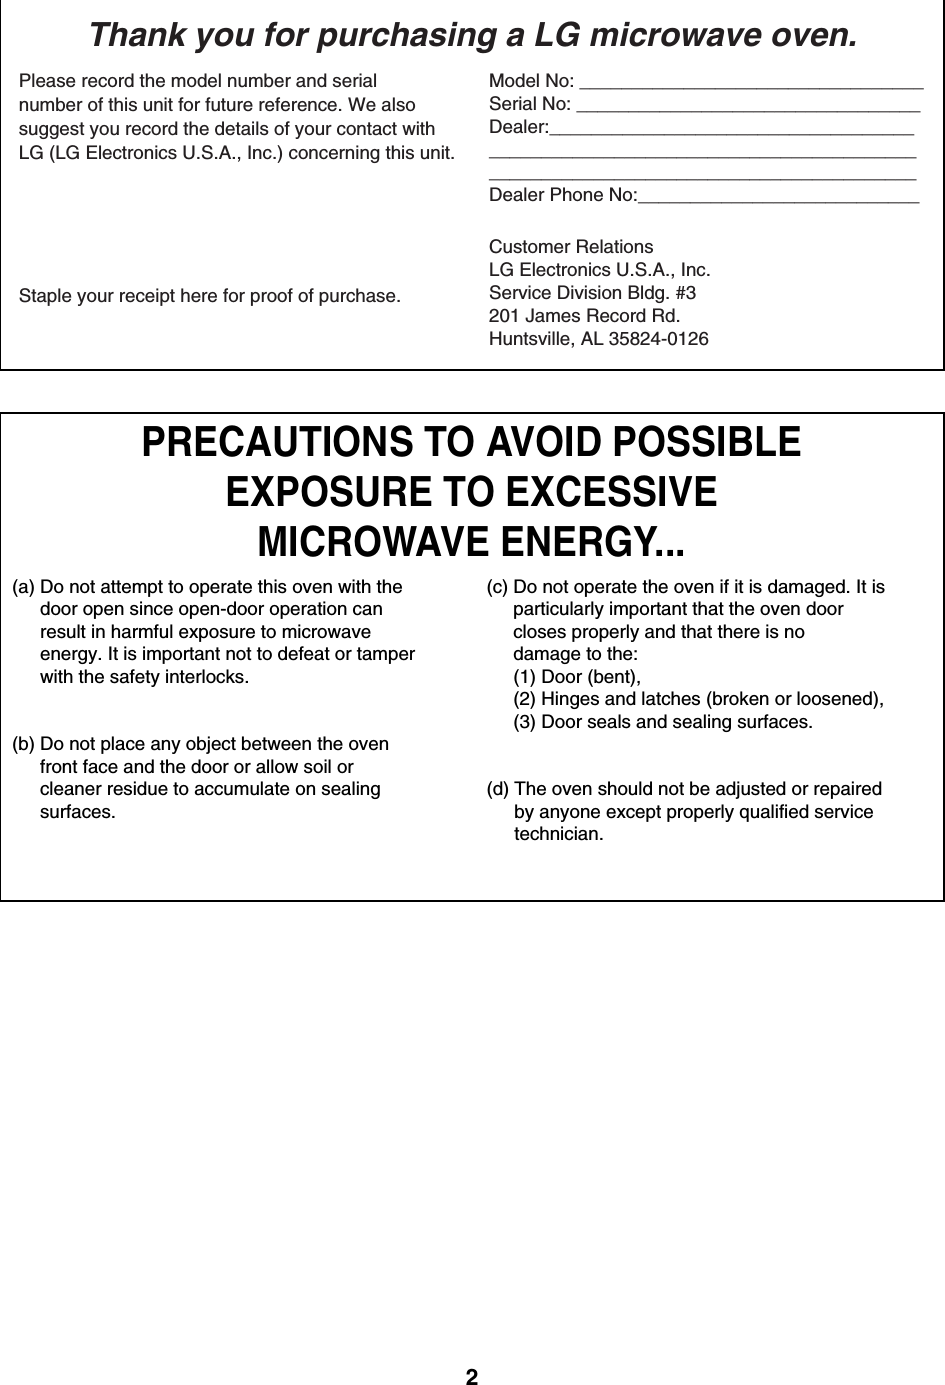 2PRECAUTIONS TO AVOID POSSIBLEEXPOSURE TO EXCESSIVEMICROWAVE ENERGY...(a) Do not attempt to operate this oven with thedoor open since open-door operation canresult in harmful exposure to microwaveenergy. It is important not to defeat or tamperwith the safety interlocks.(b) Do not place any object between the ovenfront face and the door or allow soil orcleaner residue to accumulate on sealingsurfaces.(c) Do not operate the oven if it is damaged. It isparticularly important that the oven doorcloses properly and that there is nodamage to the:(1) Door (bent),(2) Hinges and latches (broken or loosened),(3) Door seals and sealing surfaces.(d) The oven should not be adjusted or repairedby anyone except properly qualified servicetechnician.Thank you for purchasing a LG microwave oven.Please record the model number and serialnumber of this unit for future reference. We alsosuggest you record the details of your contact withLG (LG Electronics U.S.A., Inc.) concerning this unit.Staple your receipt here for proof of purchase.Model No: _________________________________Serial No: _________________________________Dealer:_____________________________________________________________________________________________________________________Dealer Phone No:___________________________Customer RelationsLG Electronics U.S.A., Inc.Service Division Bldg. #3201 James Record Rd.Huntsville, AL 35824-0126